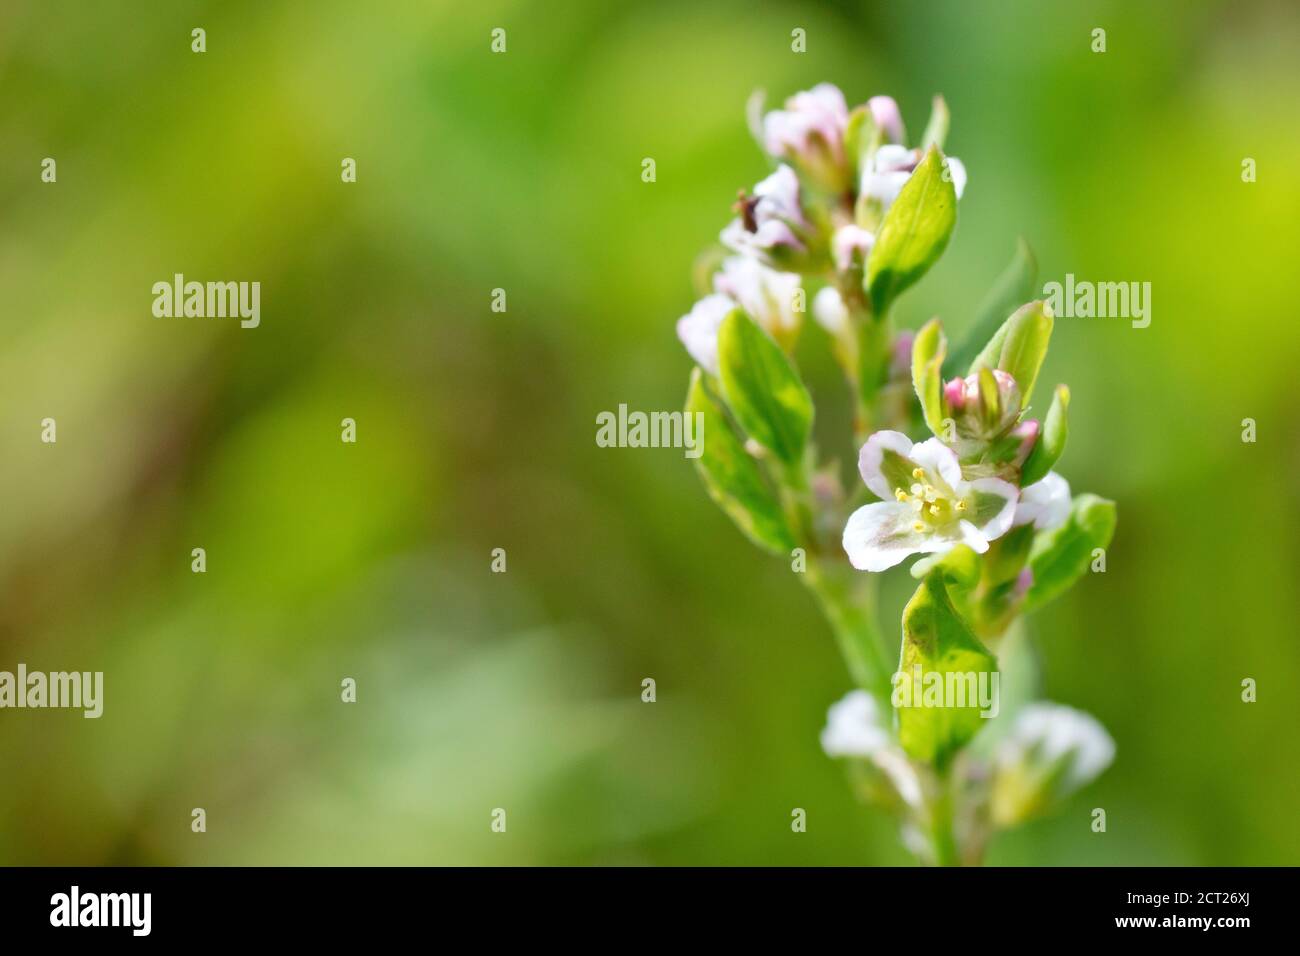 Knotgrass (polygonum aviculare), close up of a single stem showing the small white flowers, isolated against an out of focus green background. Stock Photo